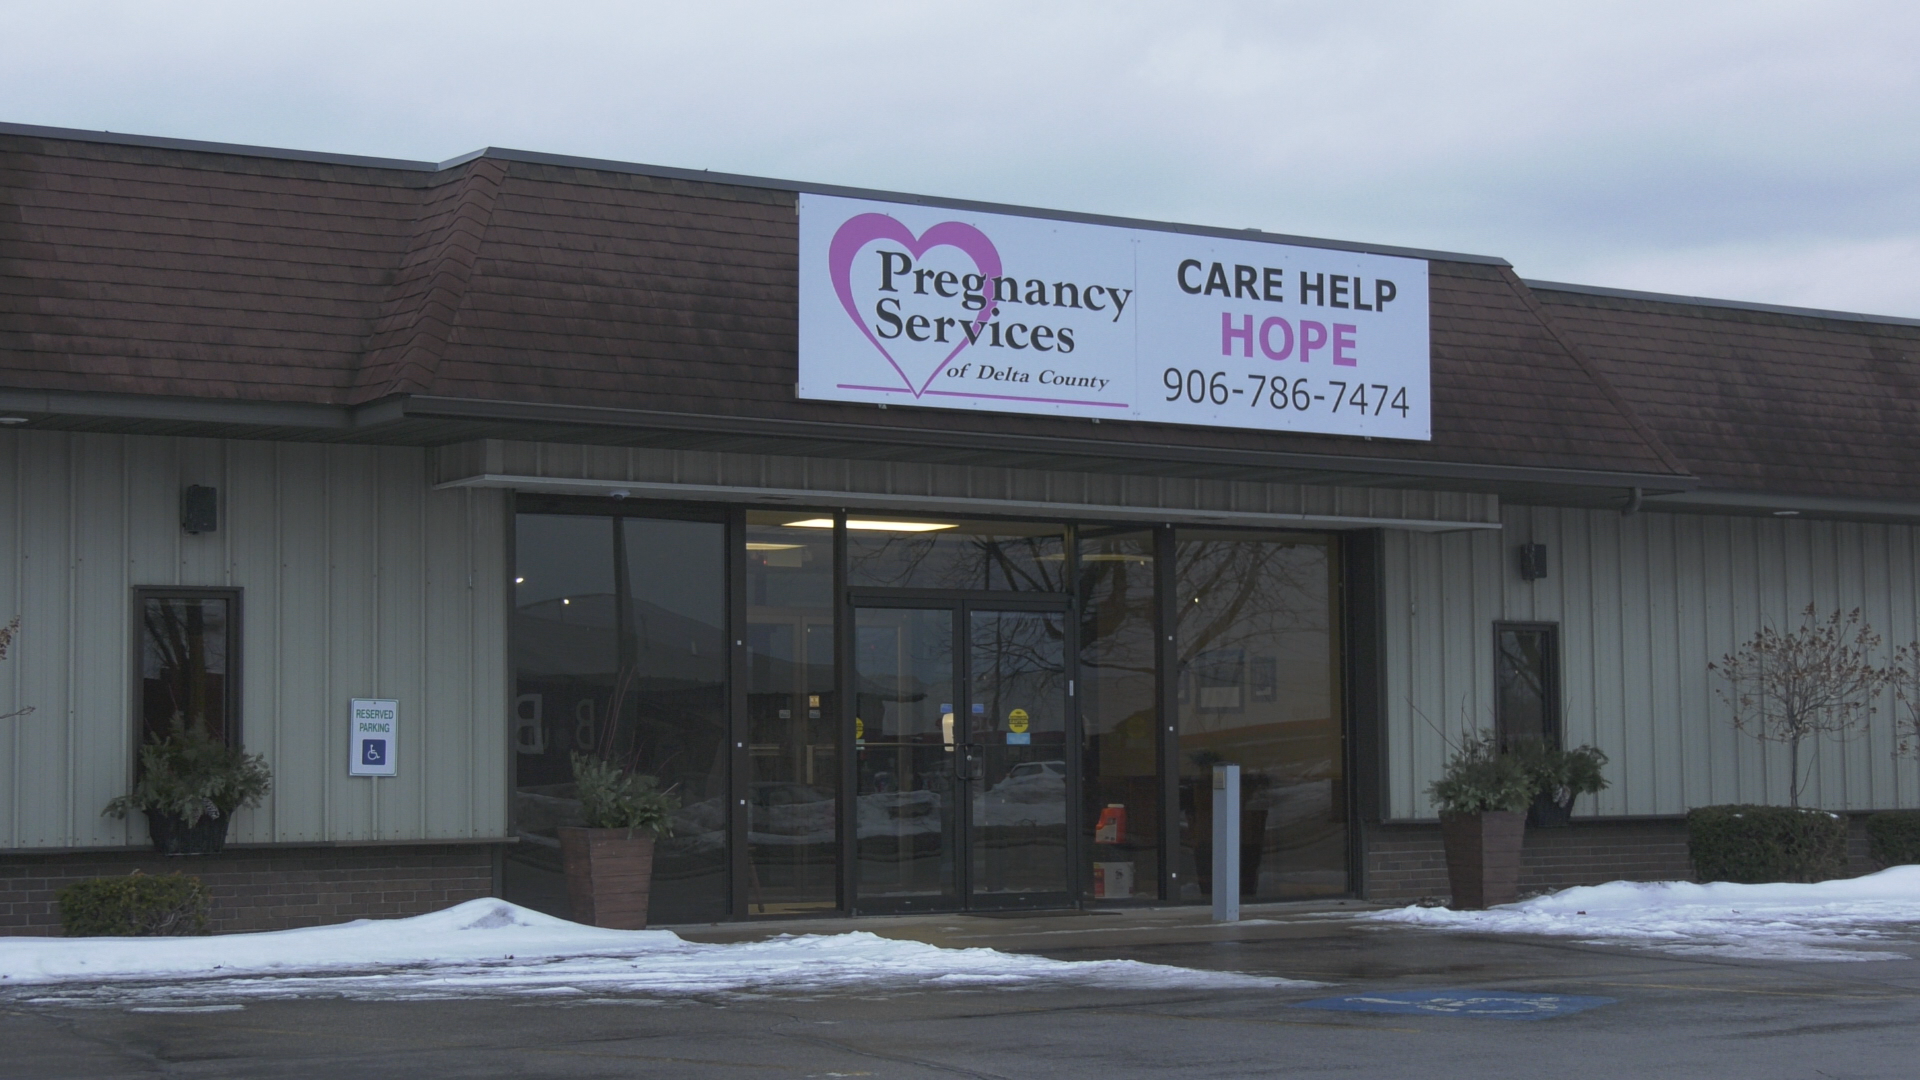 Pregnancy Services of Delta County's new building at 2501 First Avenue North